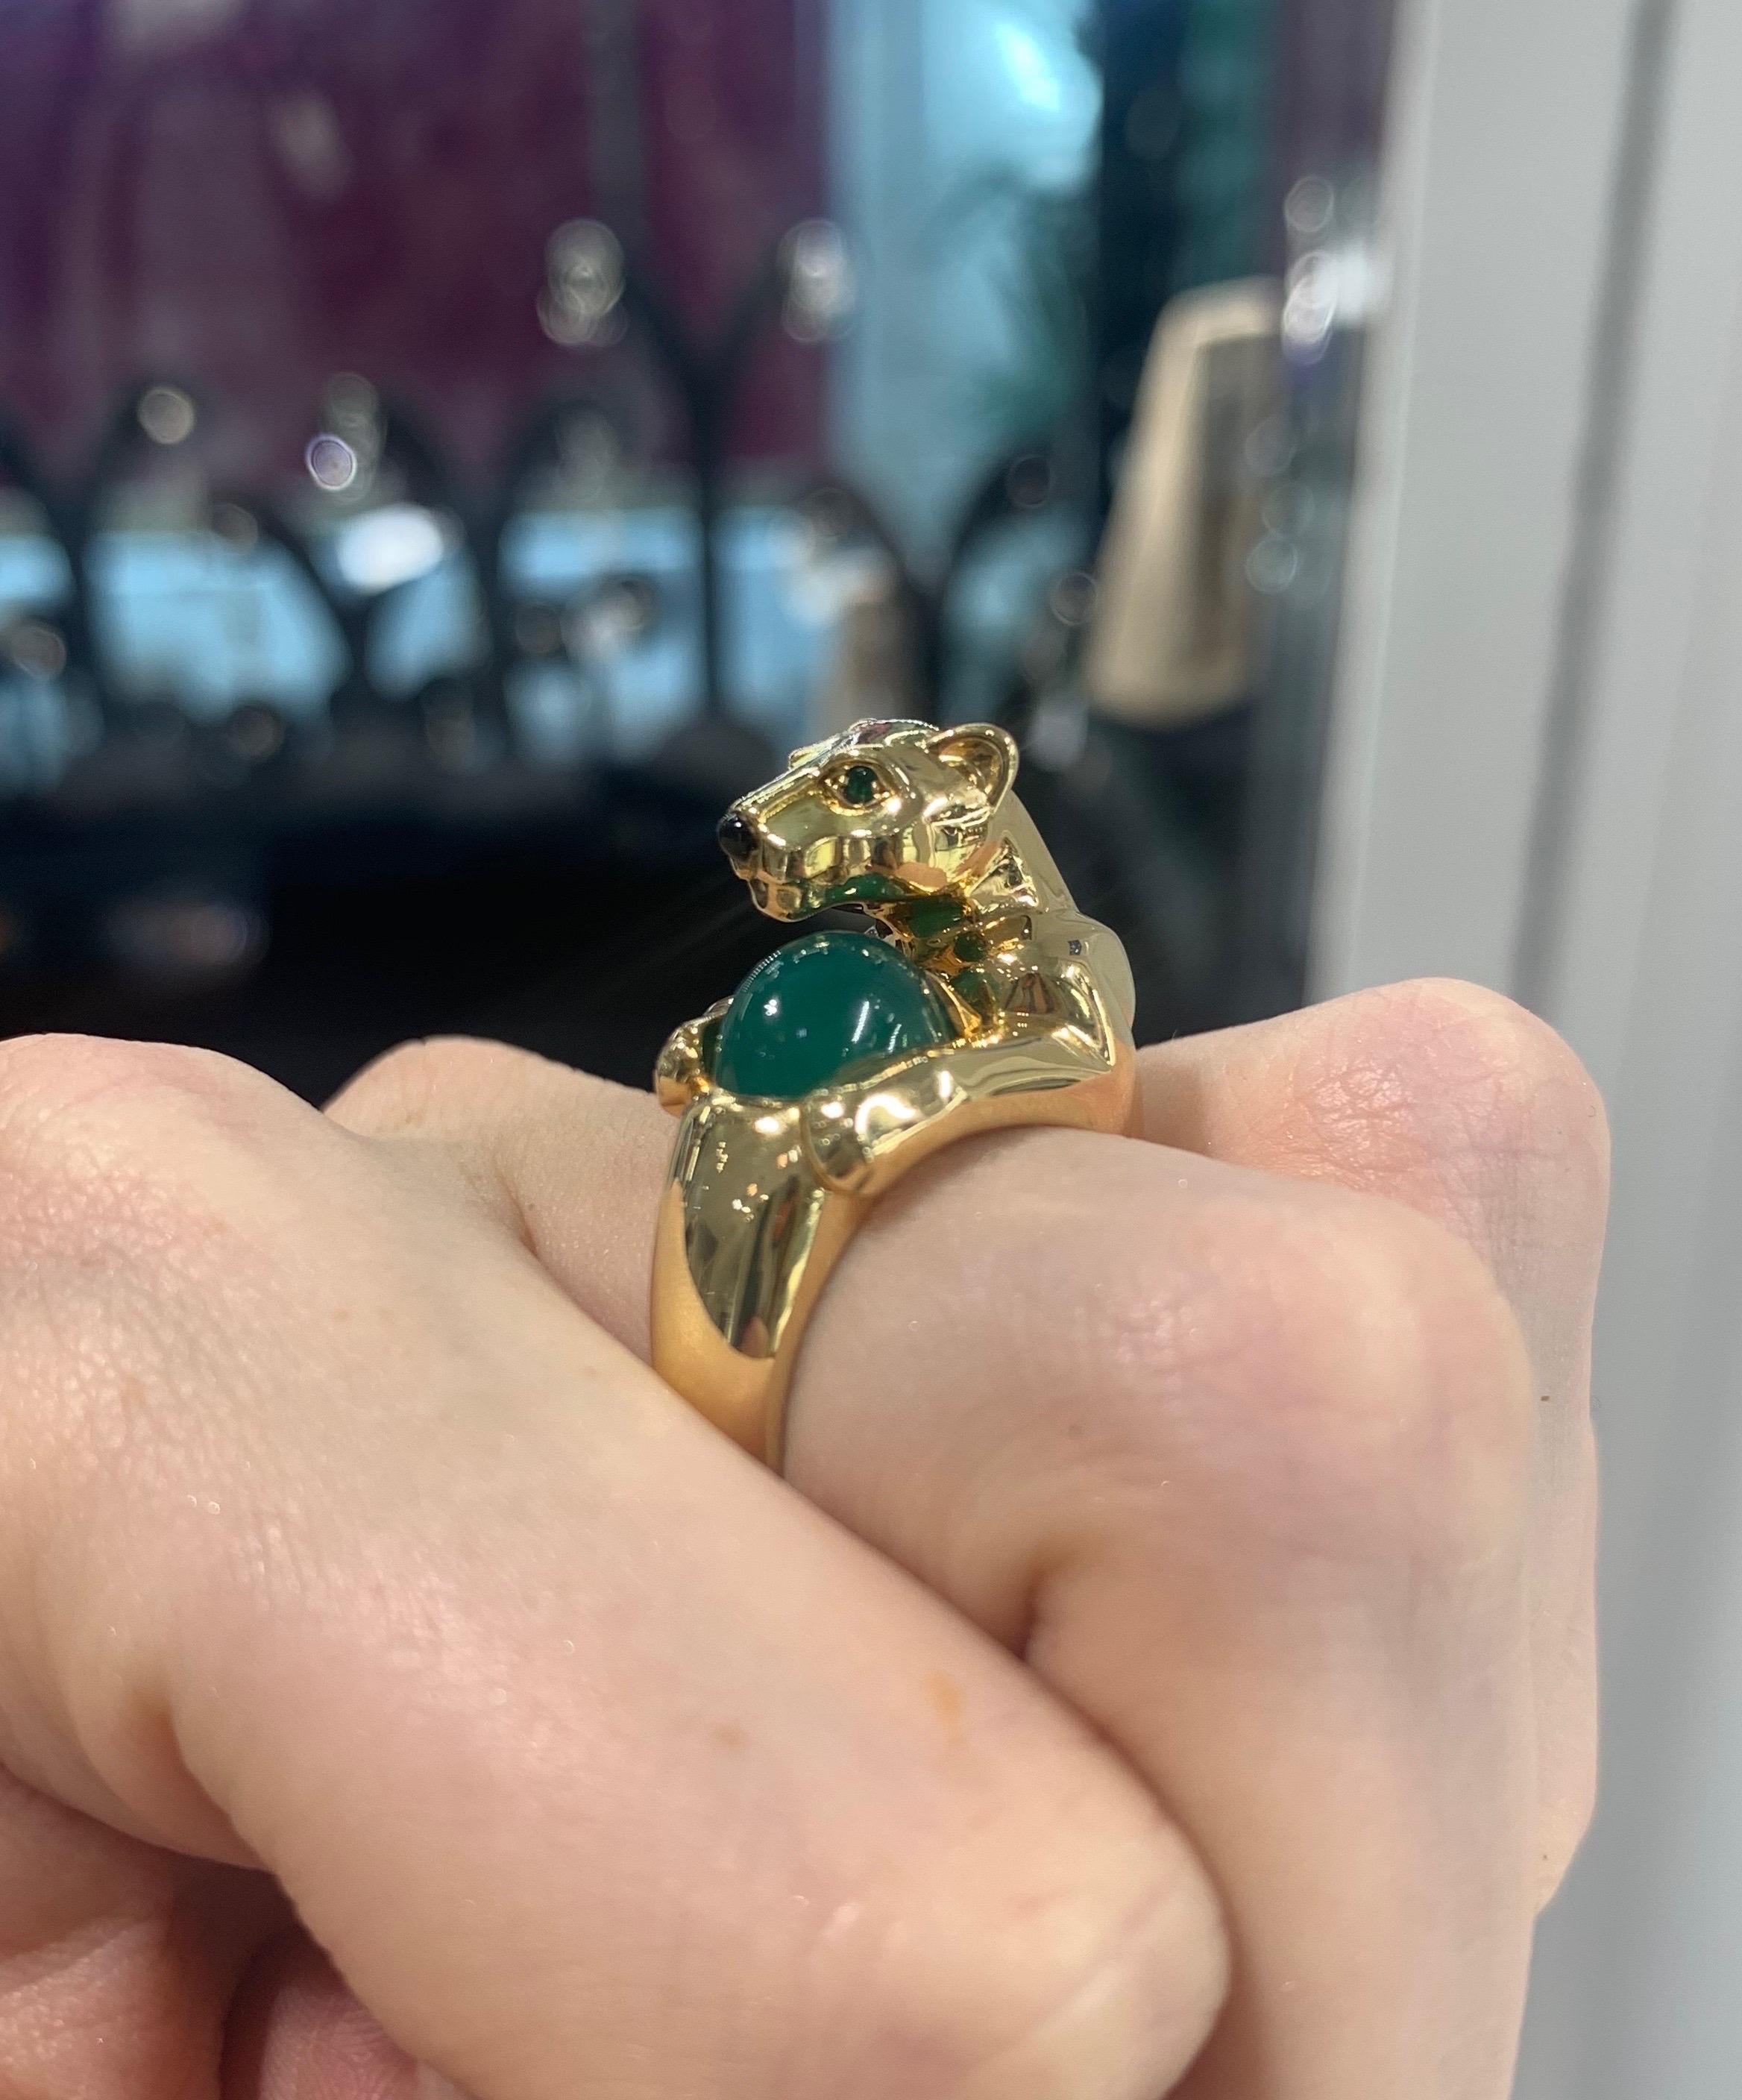 Retro Panthère de Cartier Chalcedony, Emerald and Onyx Panther Ring in 18 Karat Gold